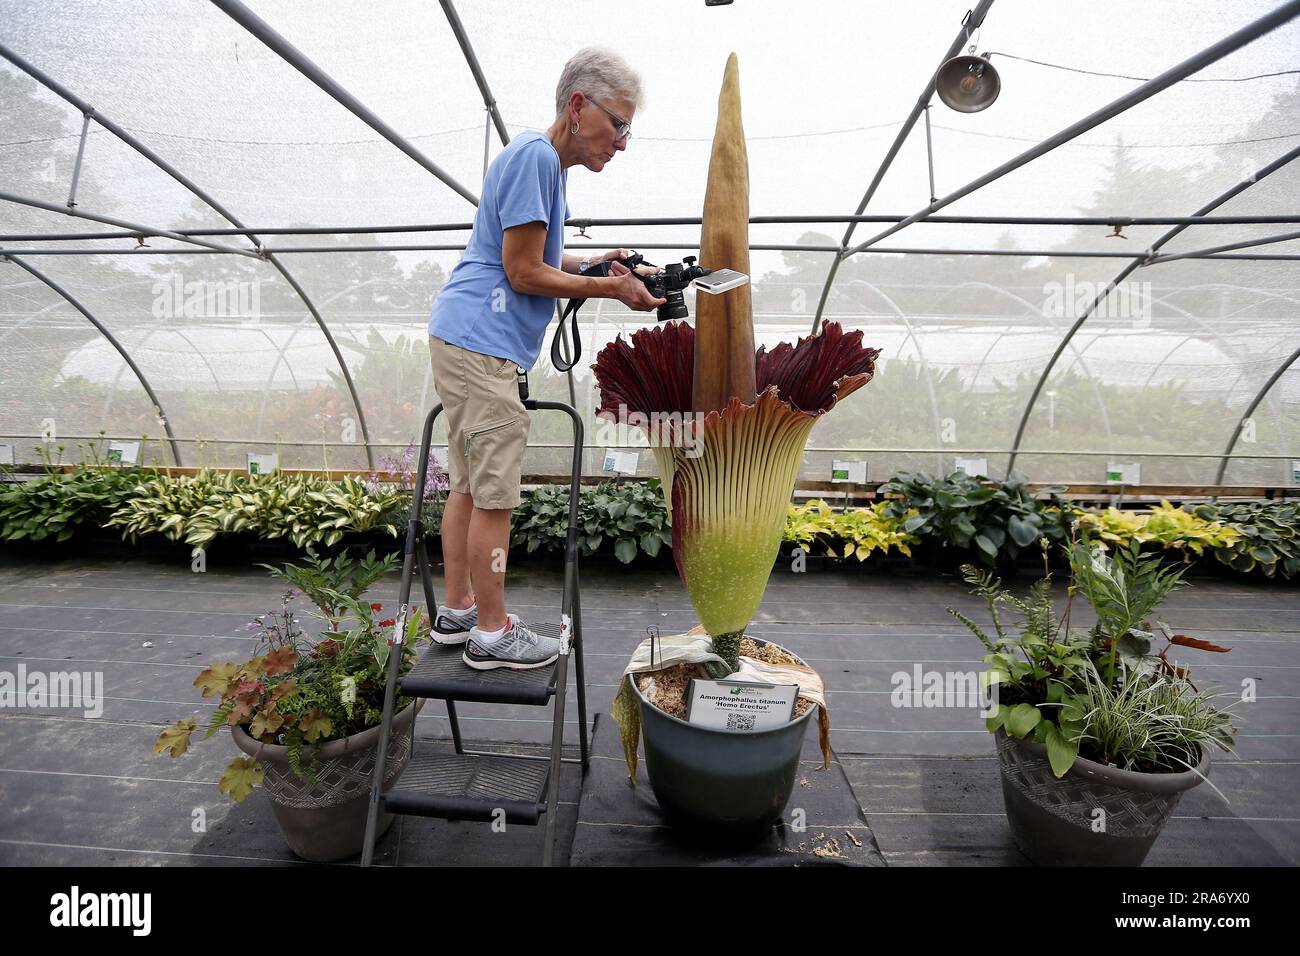 July 1, 2023, Raleigh, North Carolina, USA: DAWN BAGLEY takes a photo inside ''˜HOMO ERECTUS, ' a rare corpse flower during the second day of its bloom at Juniper Level Botanical Garden in Raleigh, NC. Amorphophallus titanum is one of the biggest, stinkiest flowers in the plant kingdom and is commonly known as the corpse flower due to its smell of rotting flesh as it blooms. It typically takes 7-10 years of vegetative growth before the corpse flower blooms for a total of 2-3 days. The flower is so rare that fewer than 1,000 Titan Arums have flowered in cultivation worldwide. (Credit Image: © Stock Photo